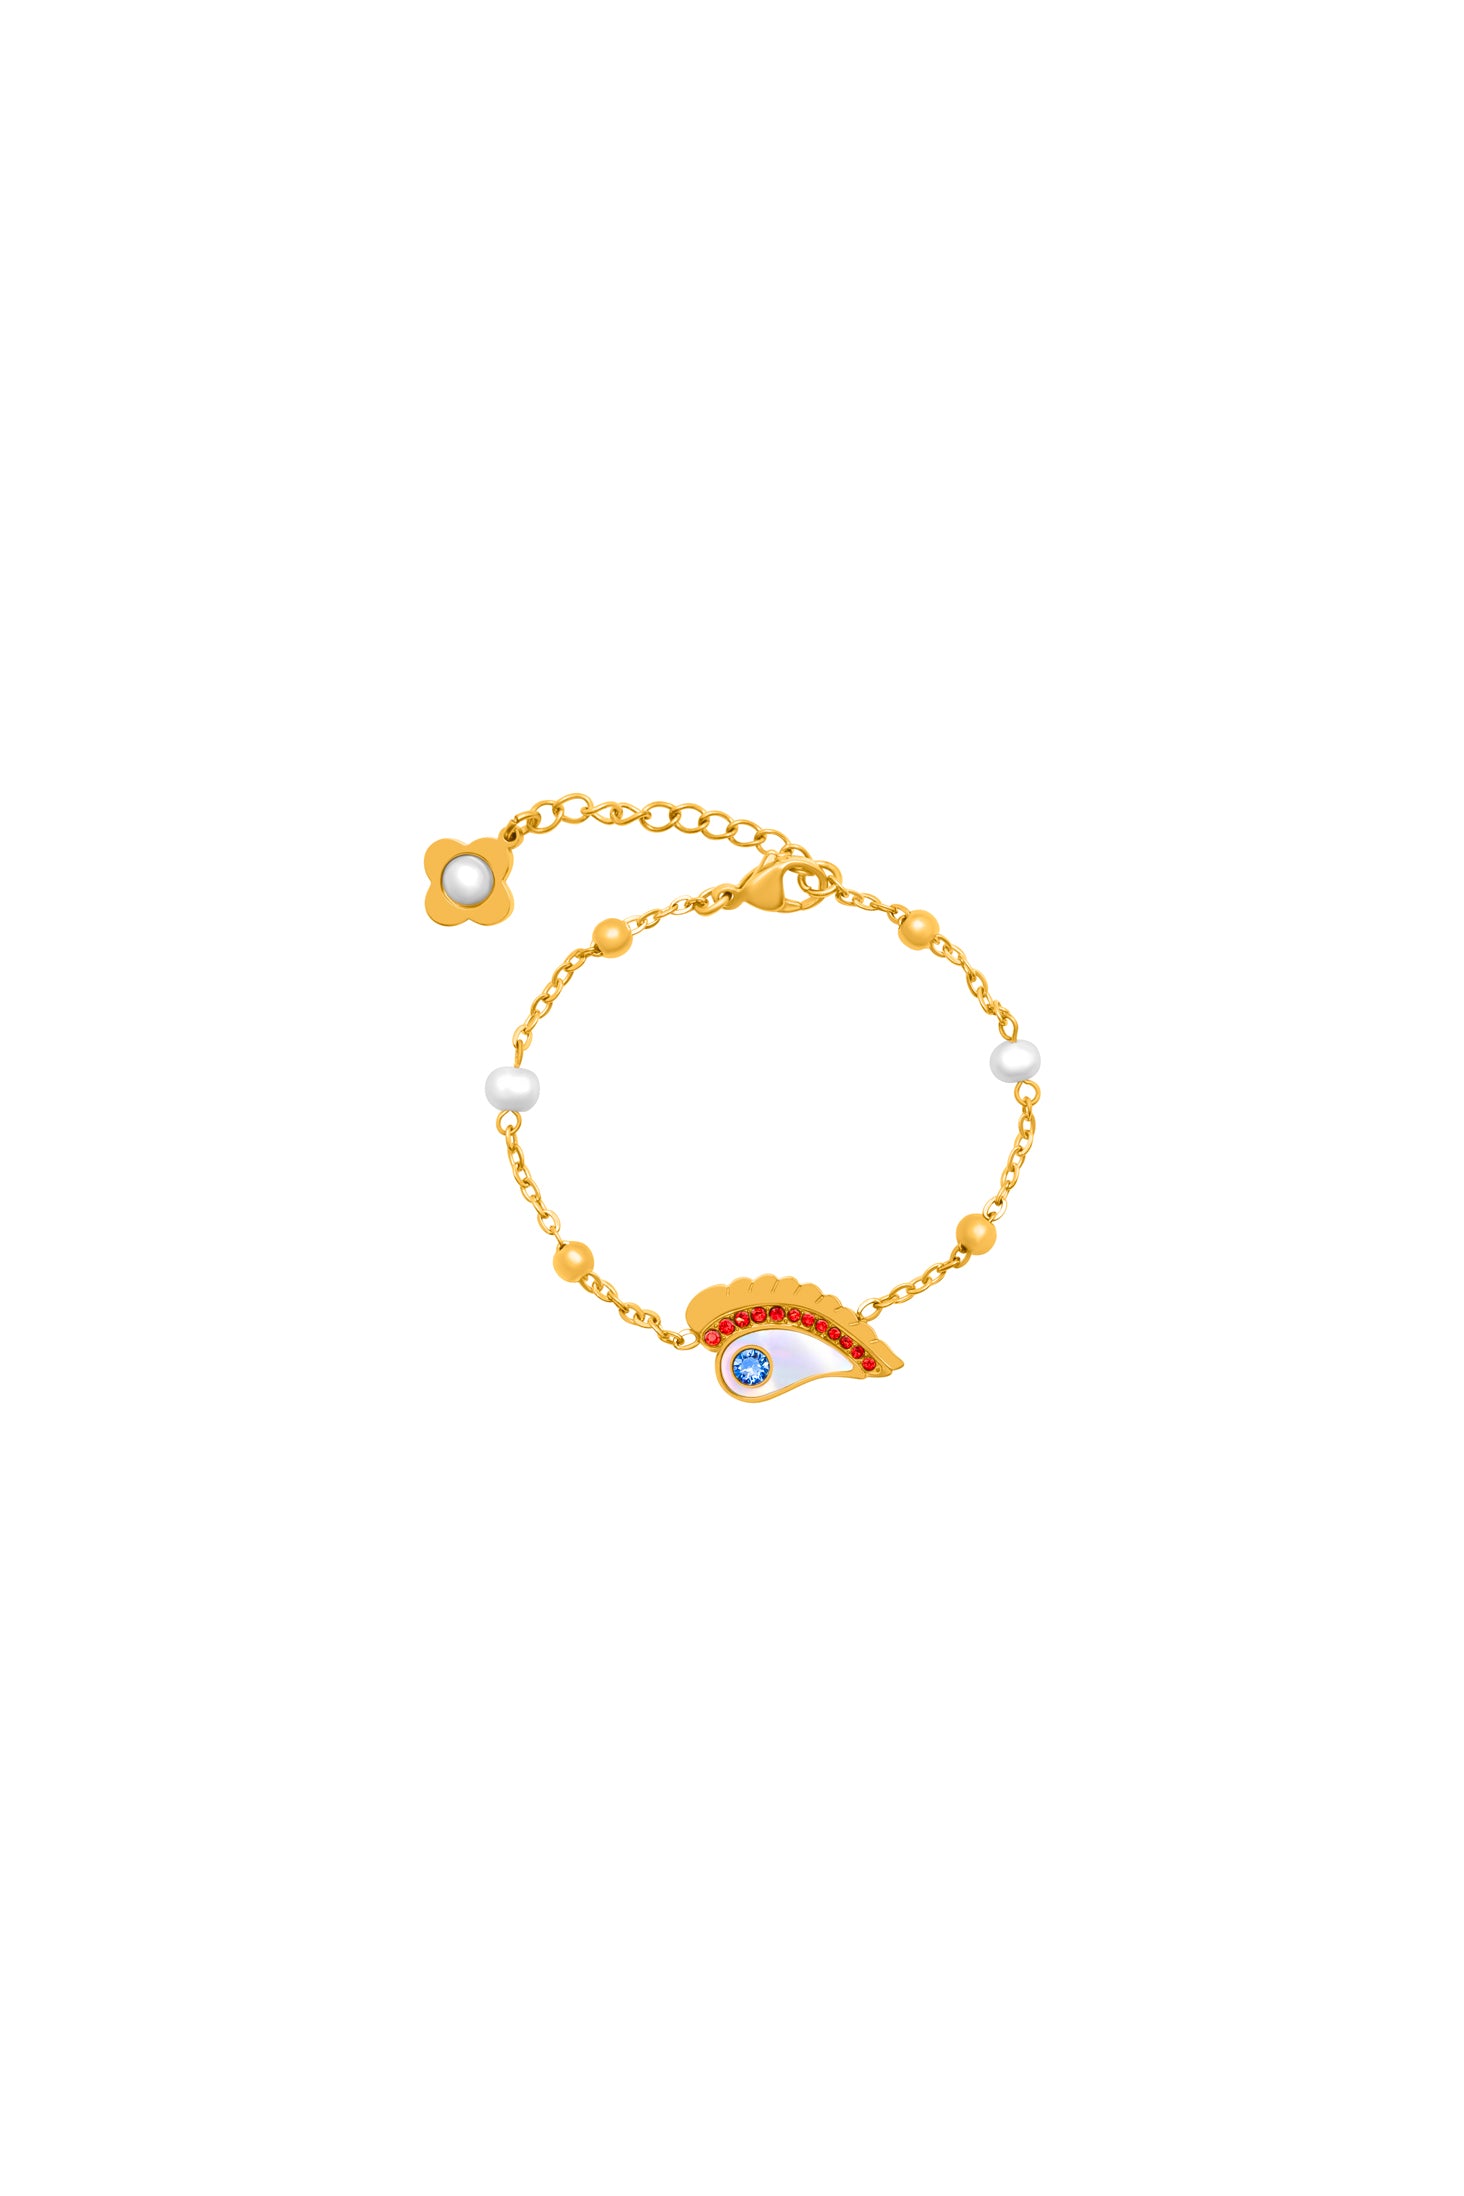 Traditional Luzzu Eye Mother of Pearl Bracelet